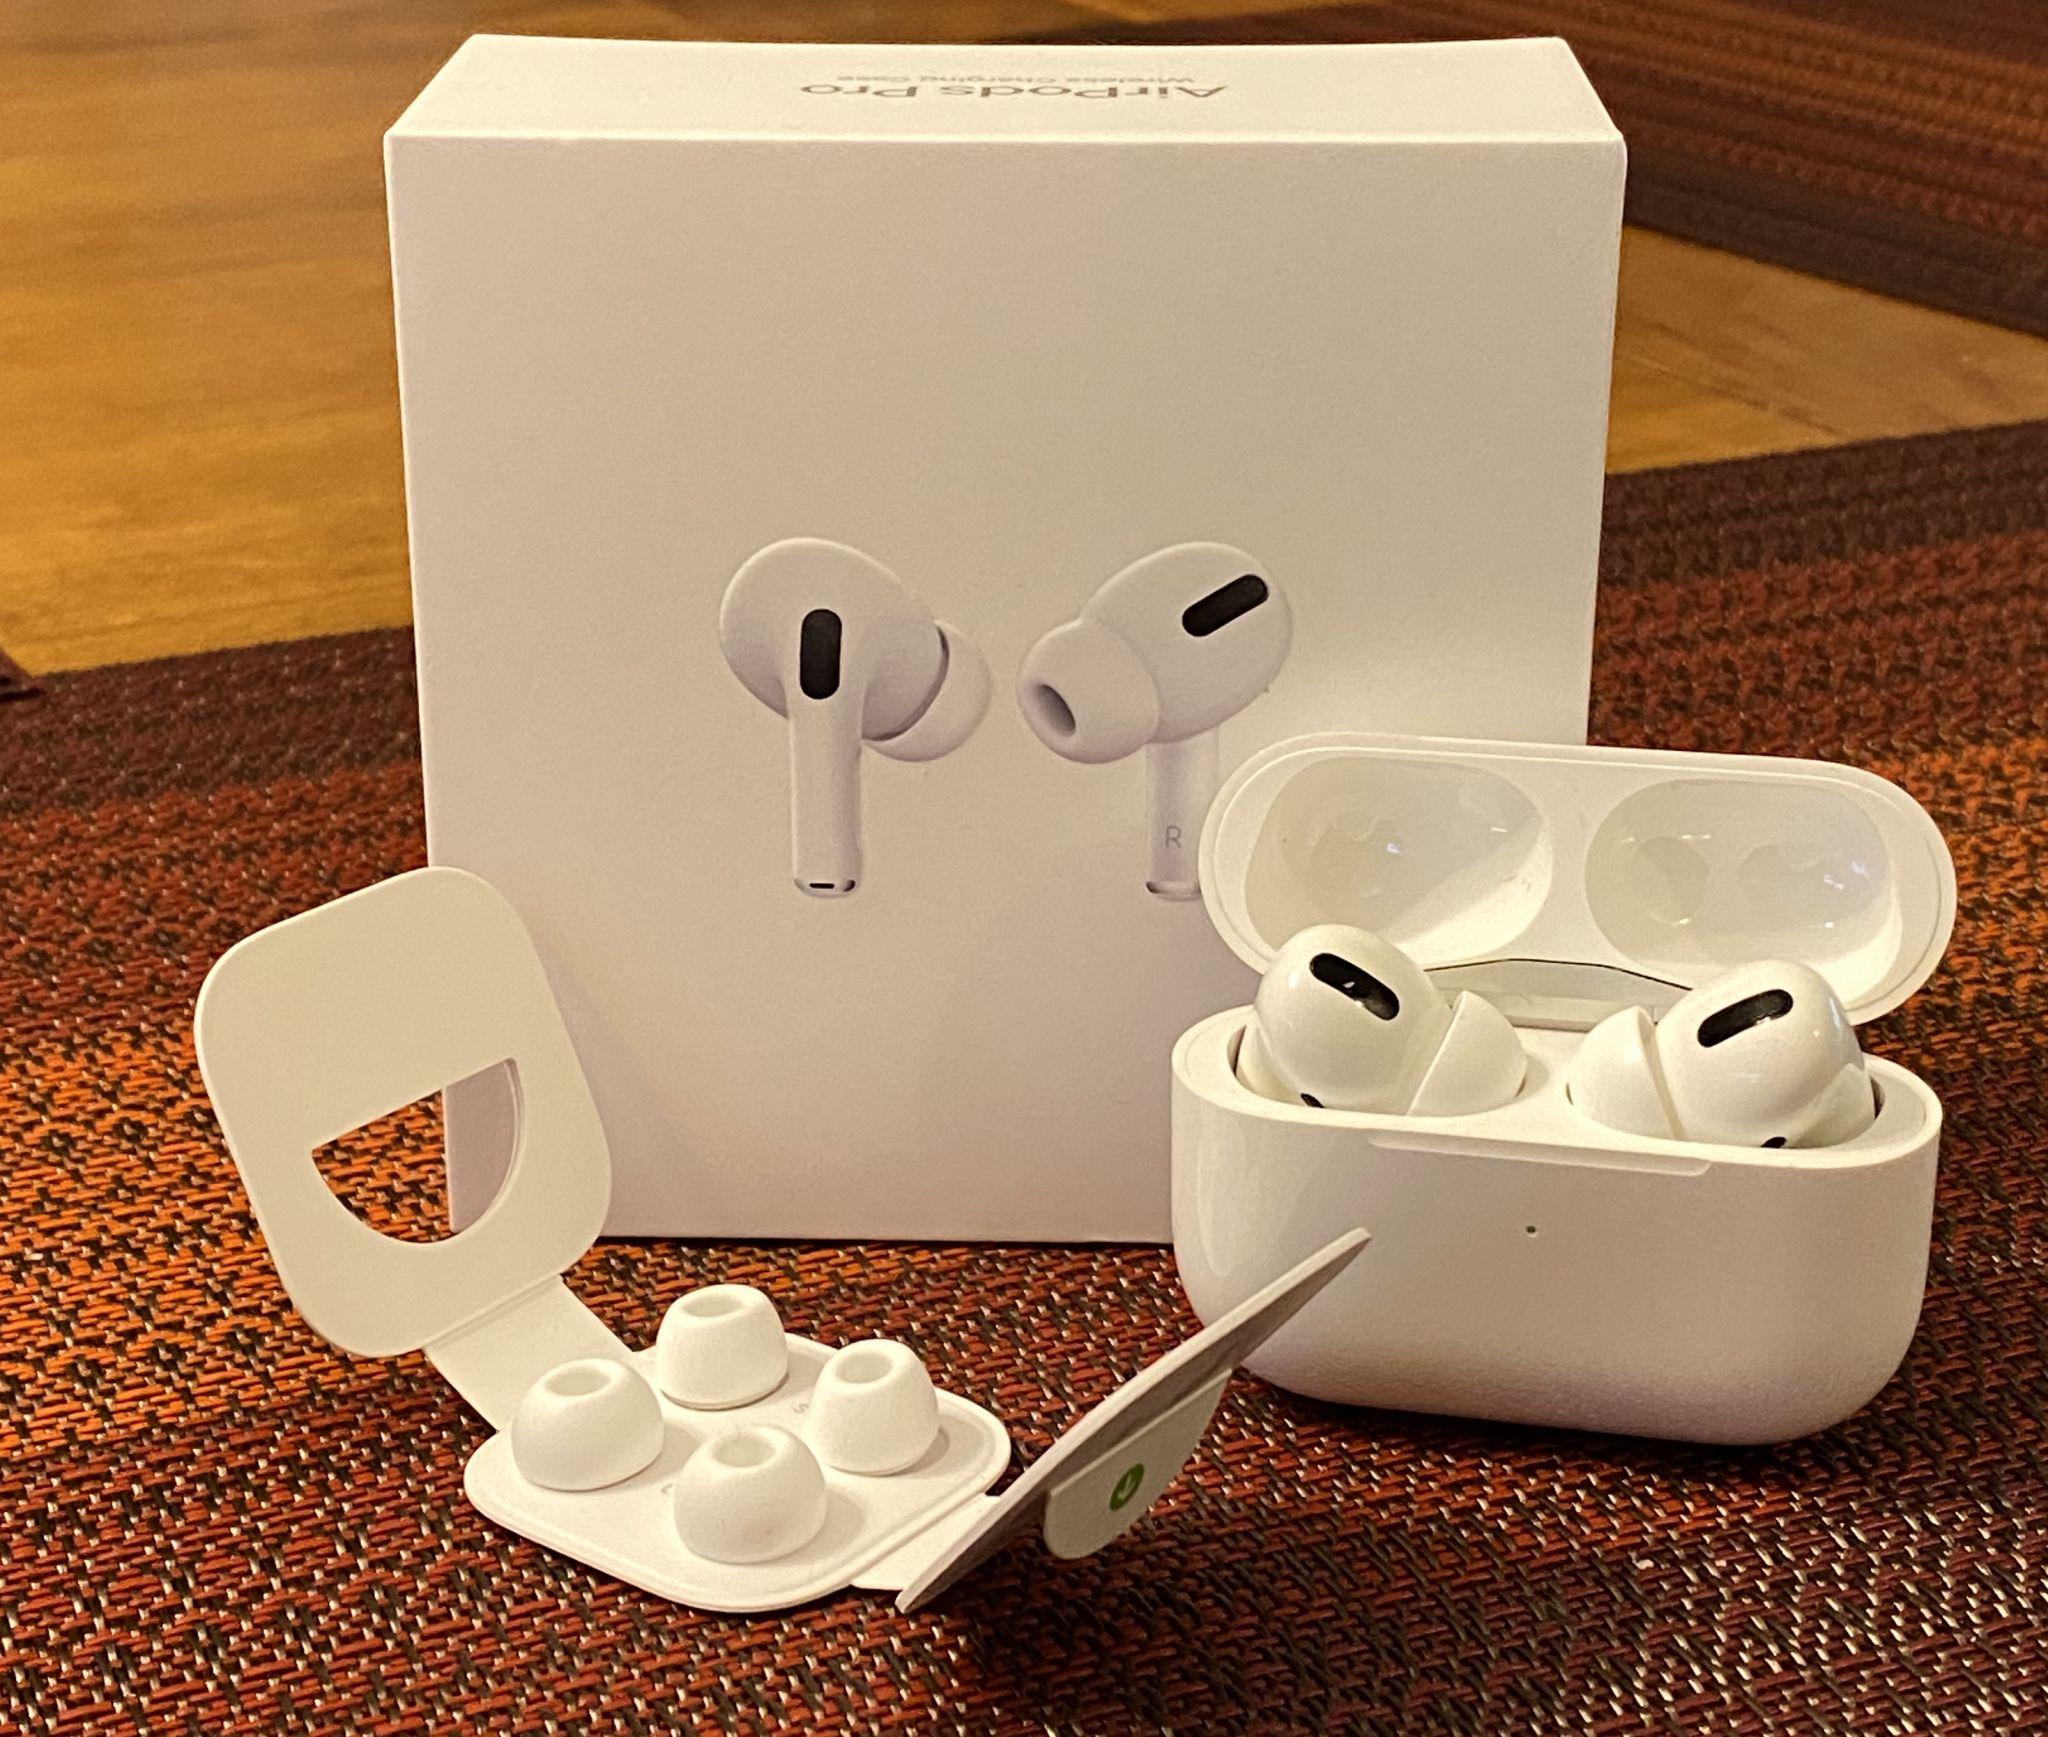 krybdyr projektor pude At $250, are Apple's AirPods Pro worth it?